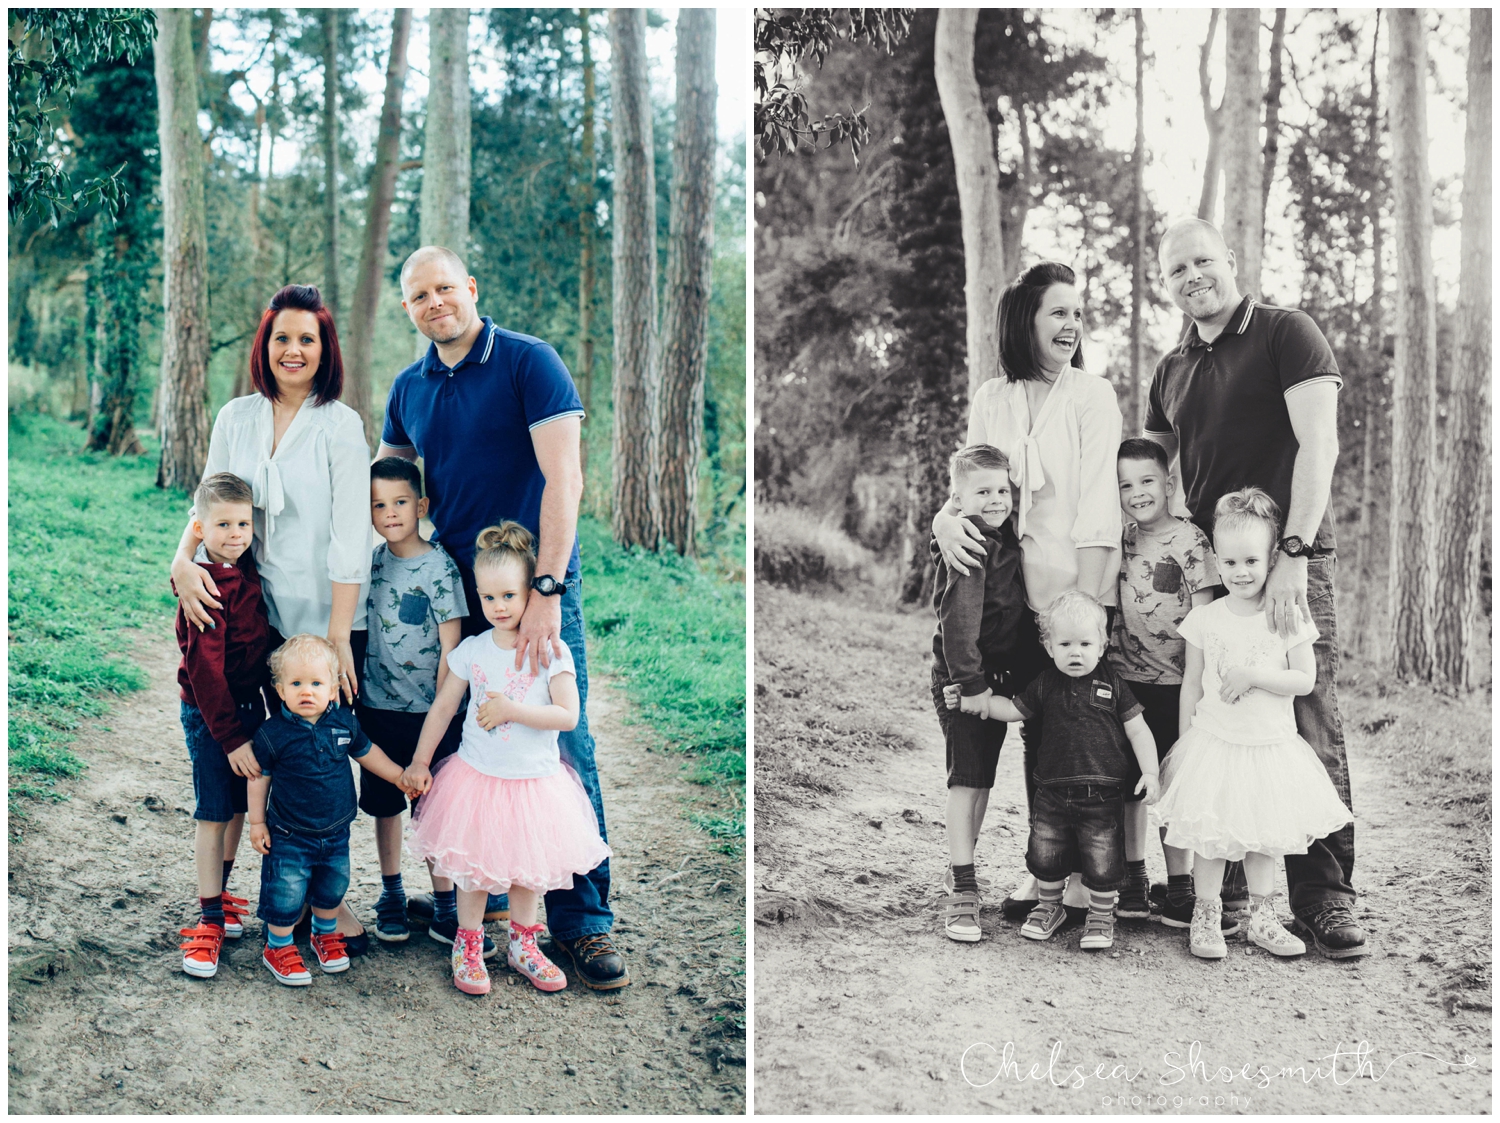 (41 of 72) Rigby Family Portrait Photography Quarry Bank Mill Styal Chelsea Shoesmith photography